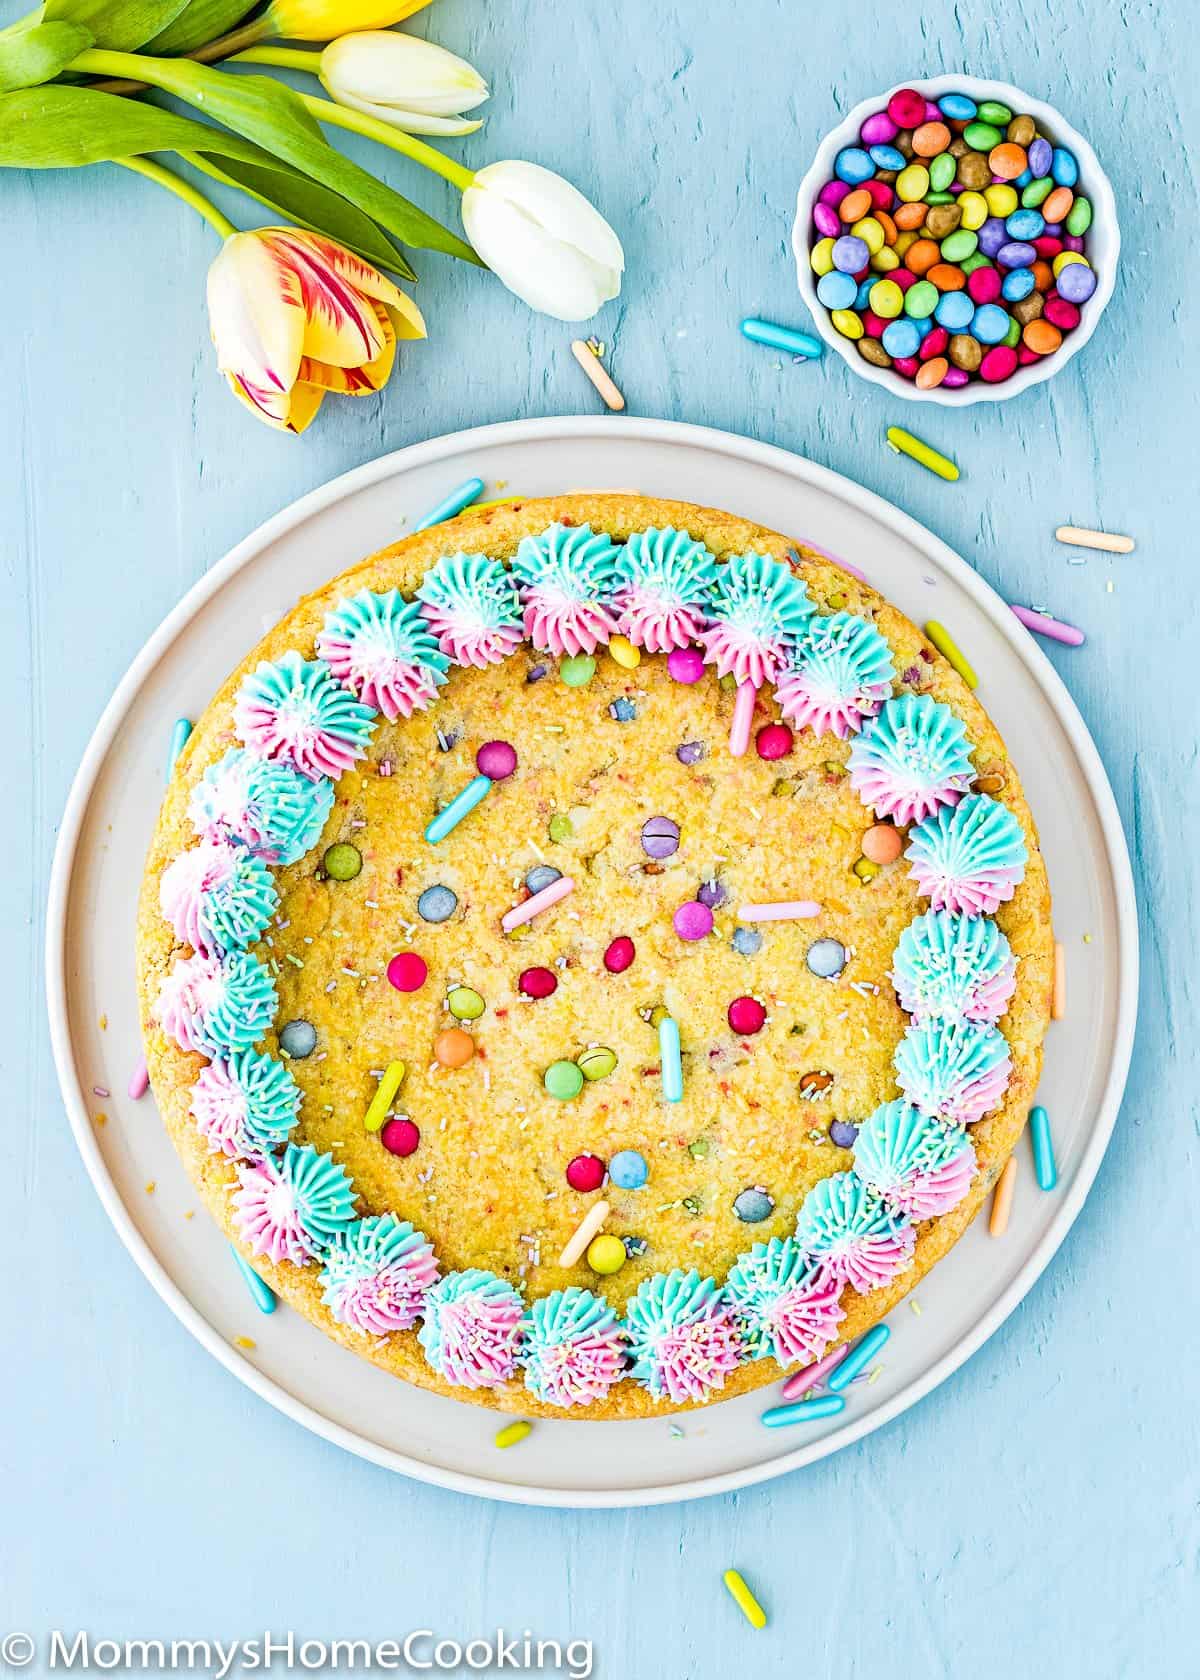 Eggless Easter Sugar Cookie Cake decorated with buttercream and sprinkles on a blue surface with flowers and chocolate candies in a bowl